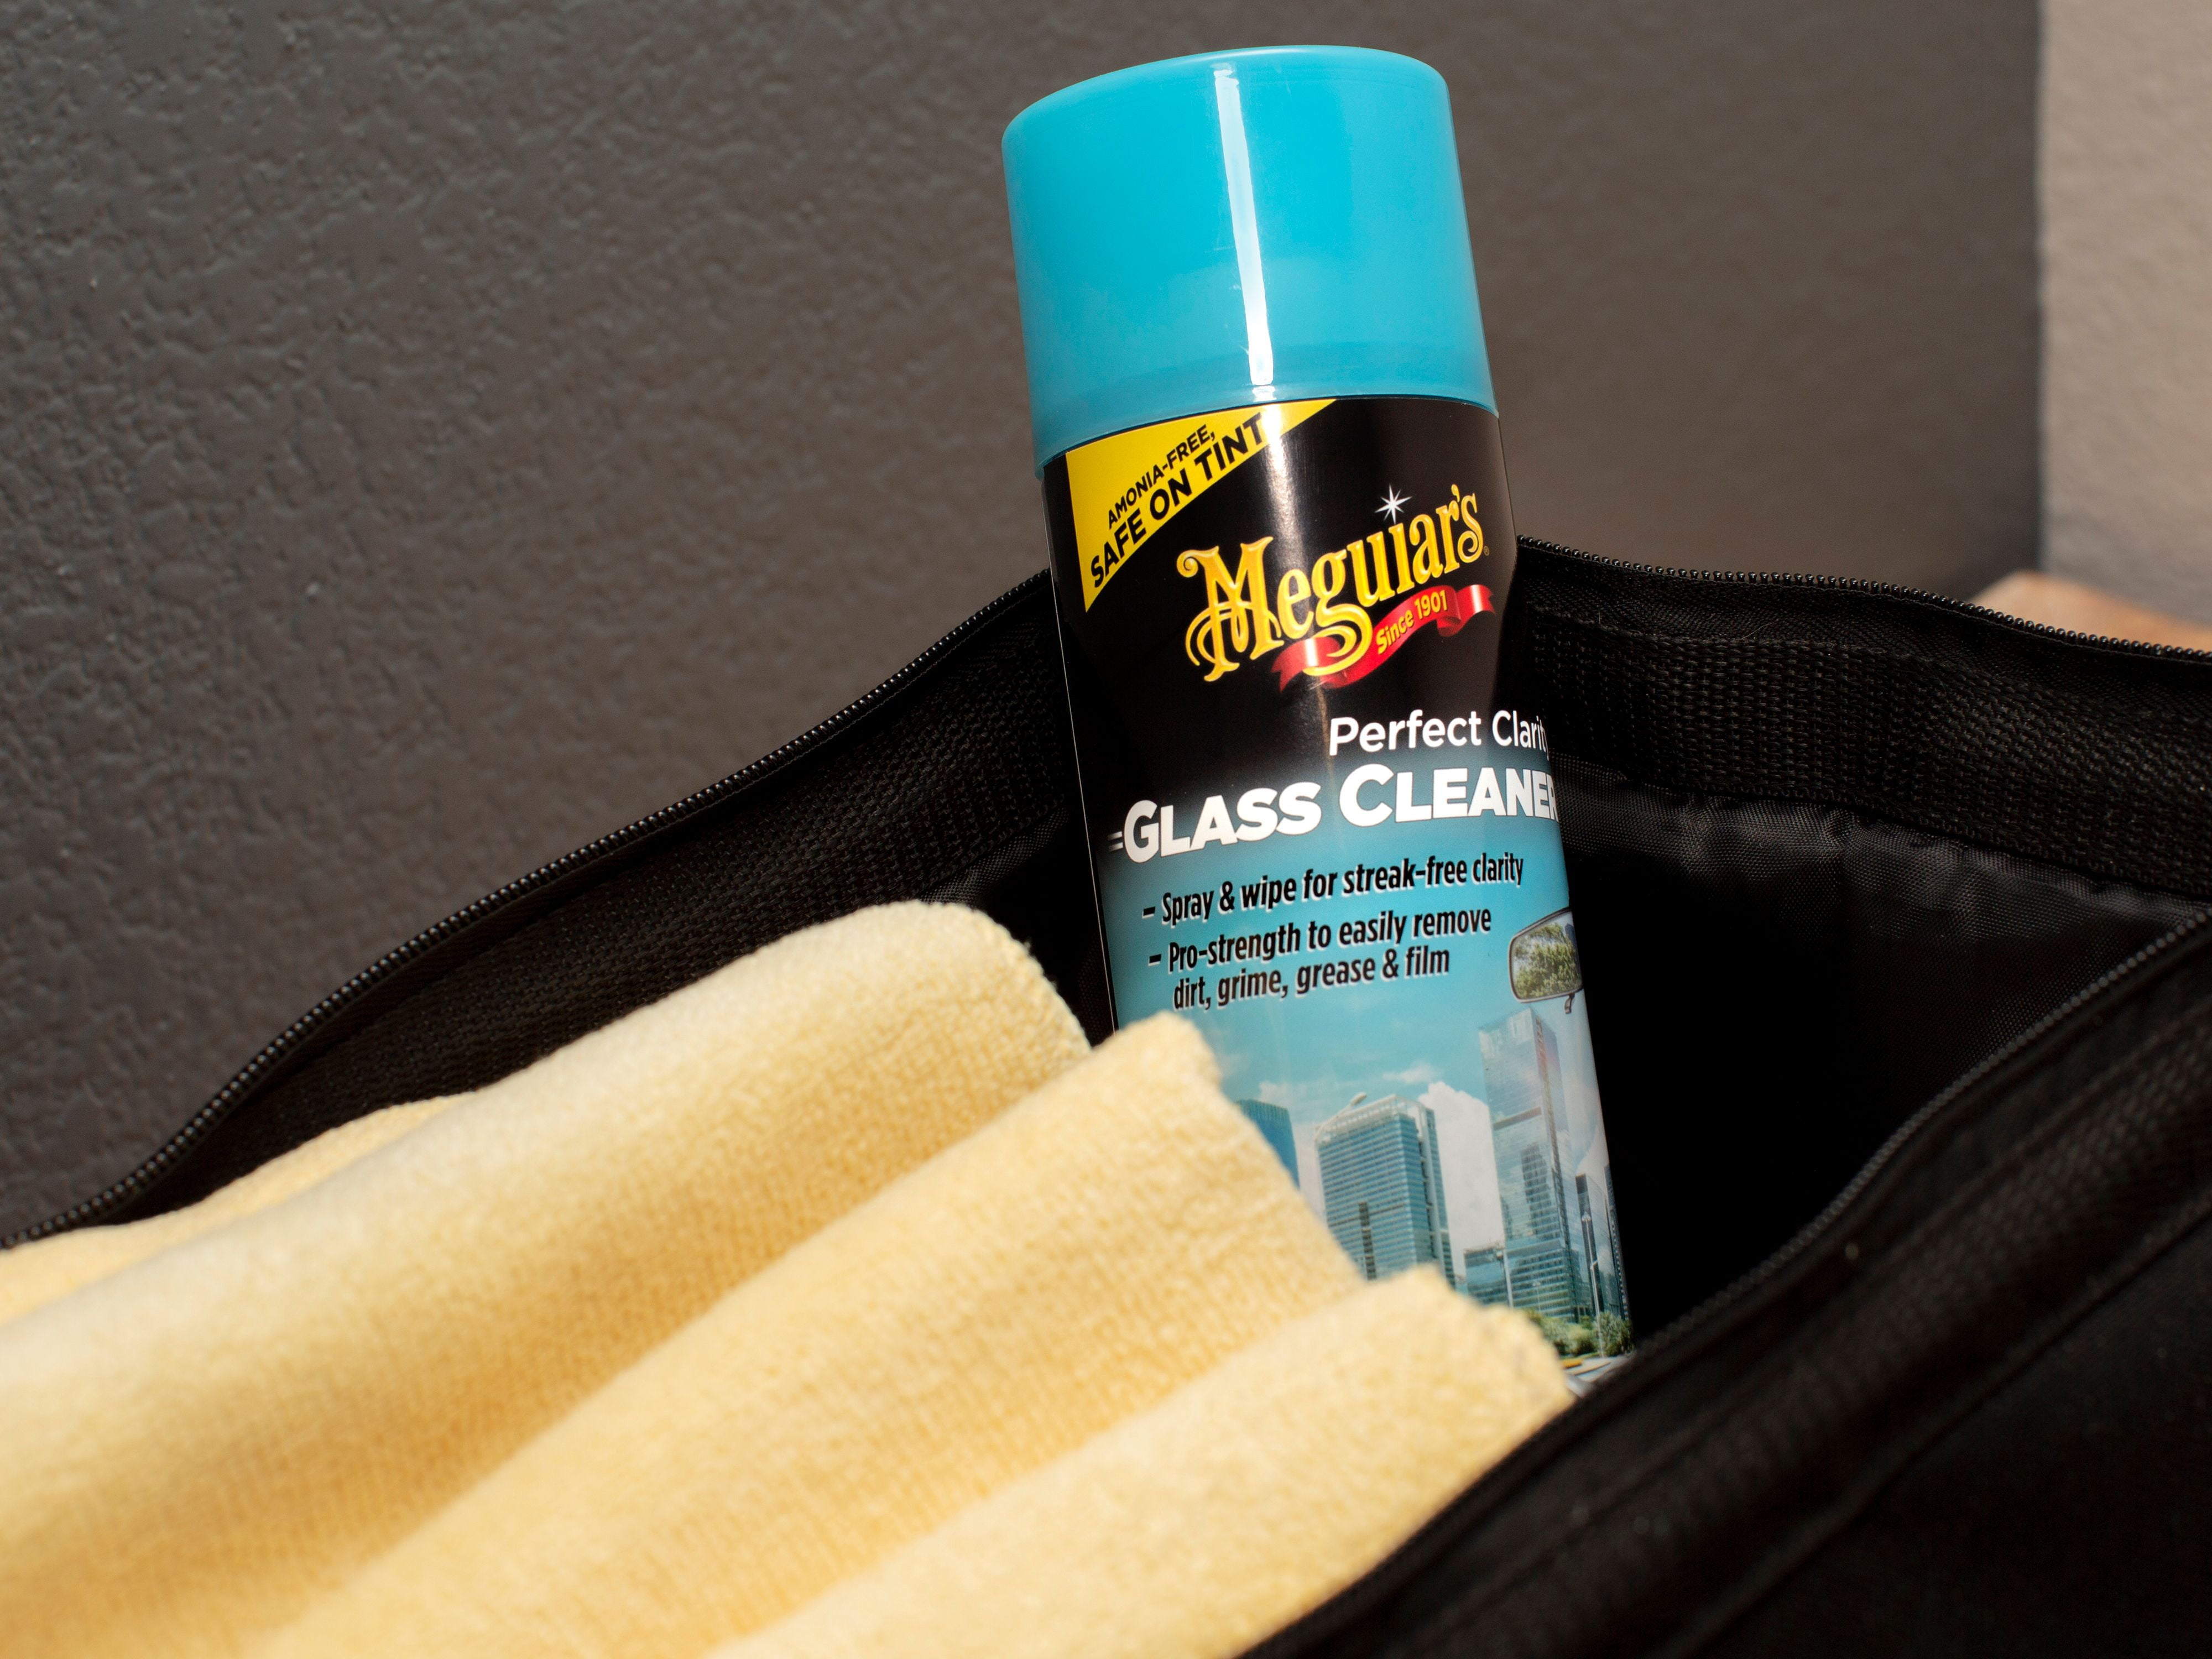 Meguiar's - When it comes to glass cleaners, do you prefer aerosol